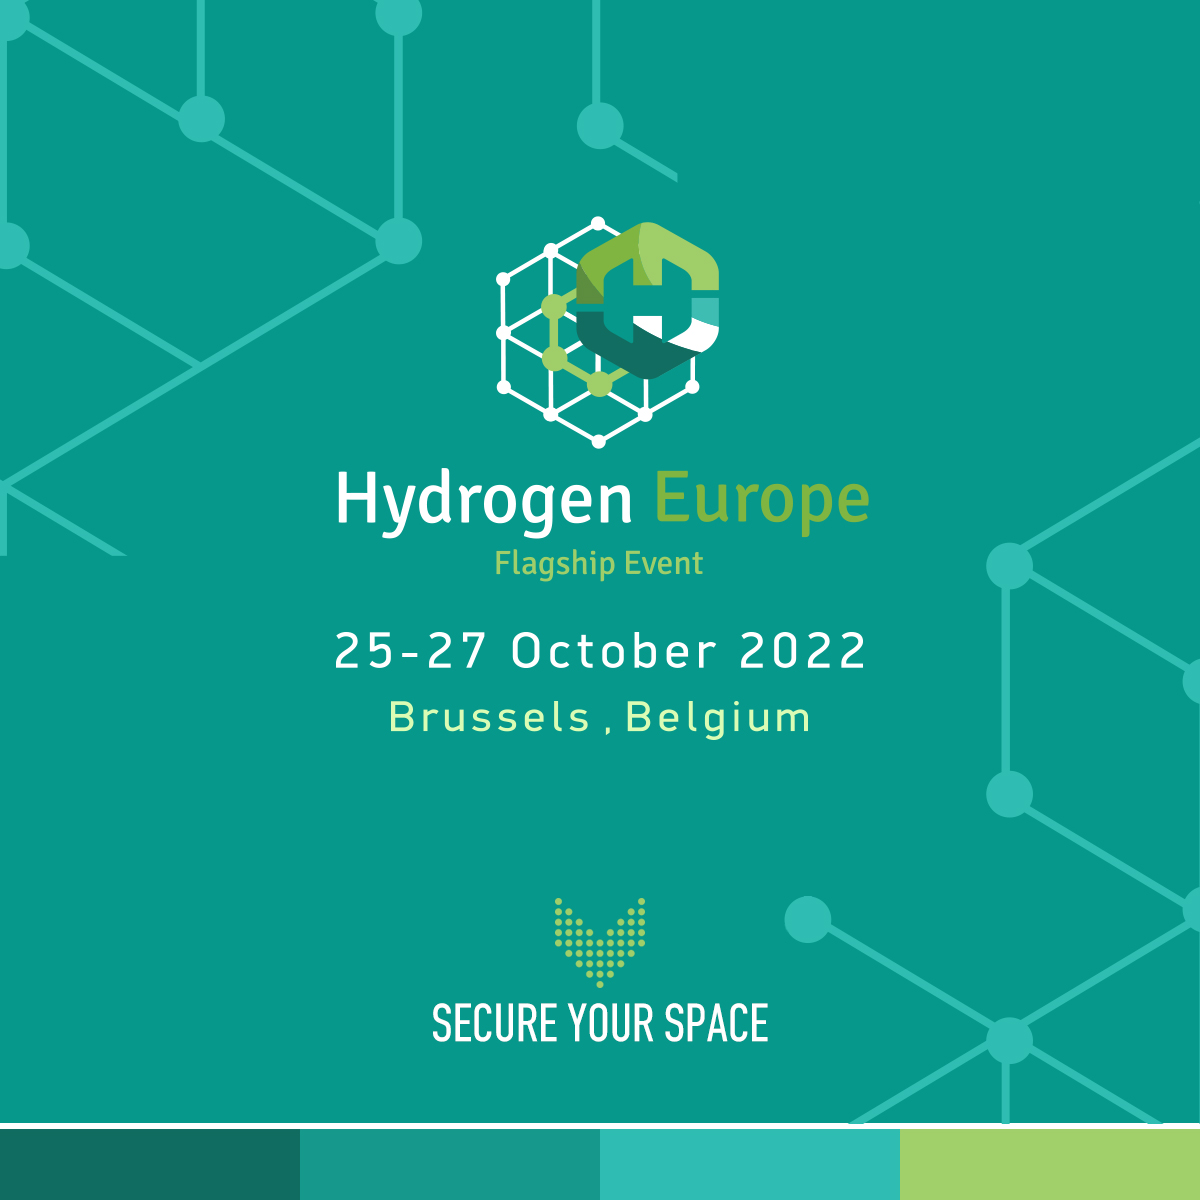 DAM GROUP: READY FOR THE 3RD EDITION OF HYDROGENE EUROPE- FLAGSHIP EVENT EXPO 2022